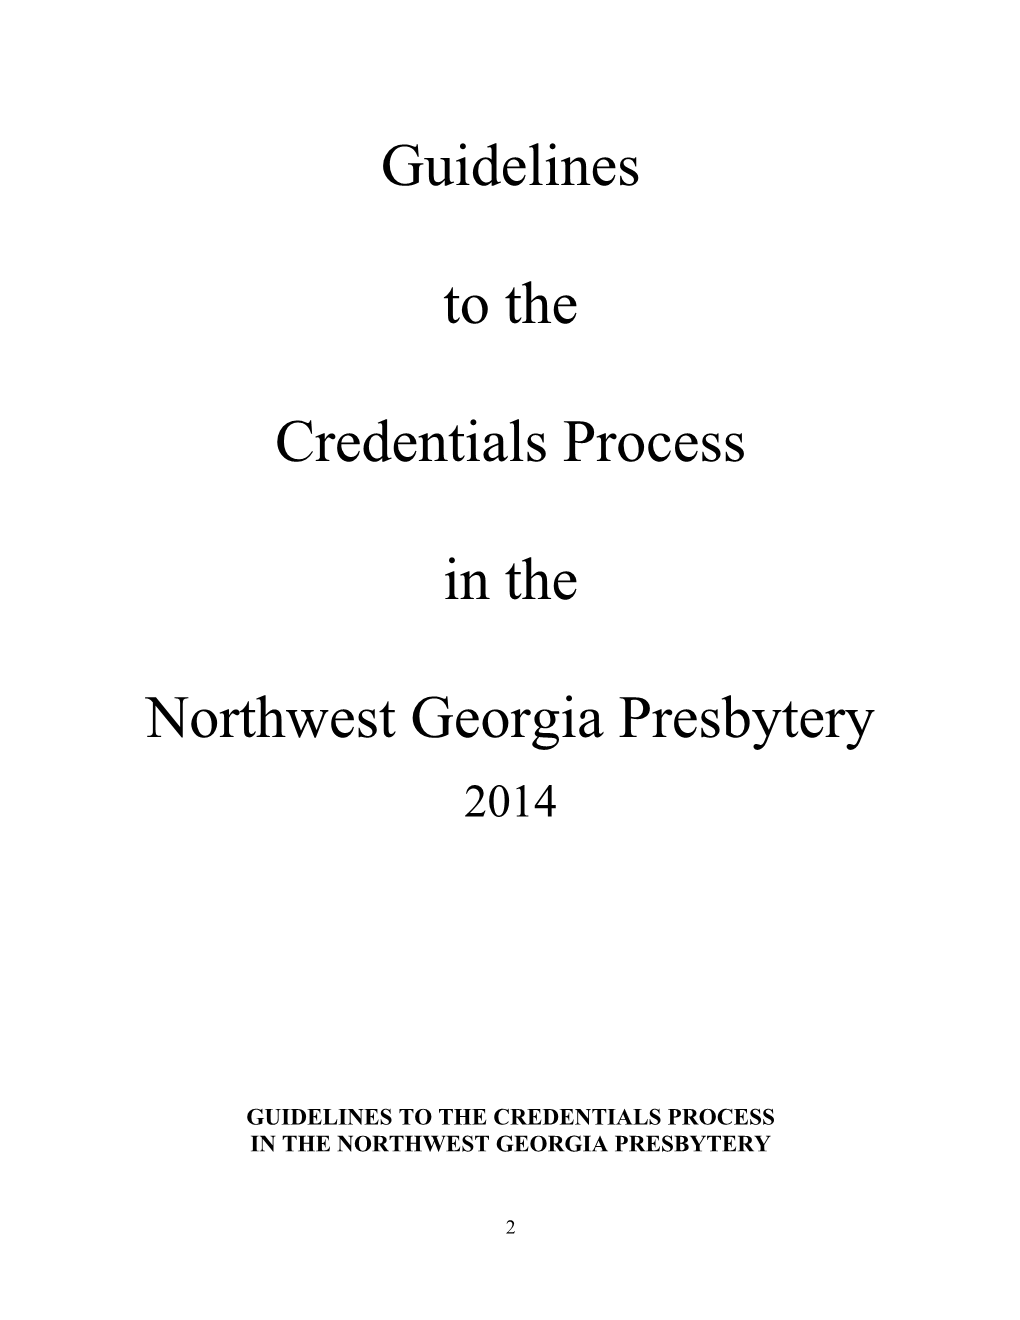 Guidelines to the Credentials Process